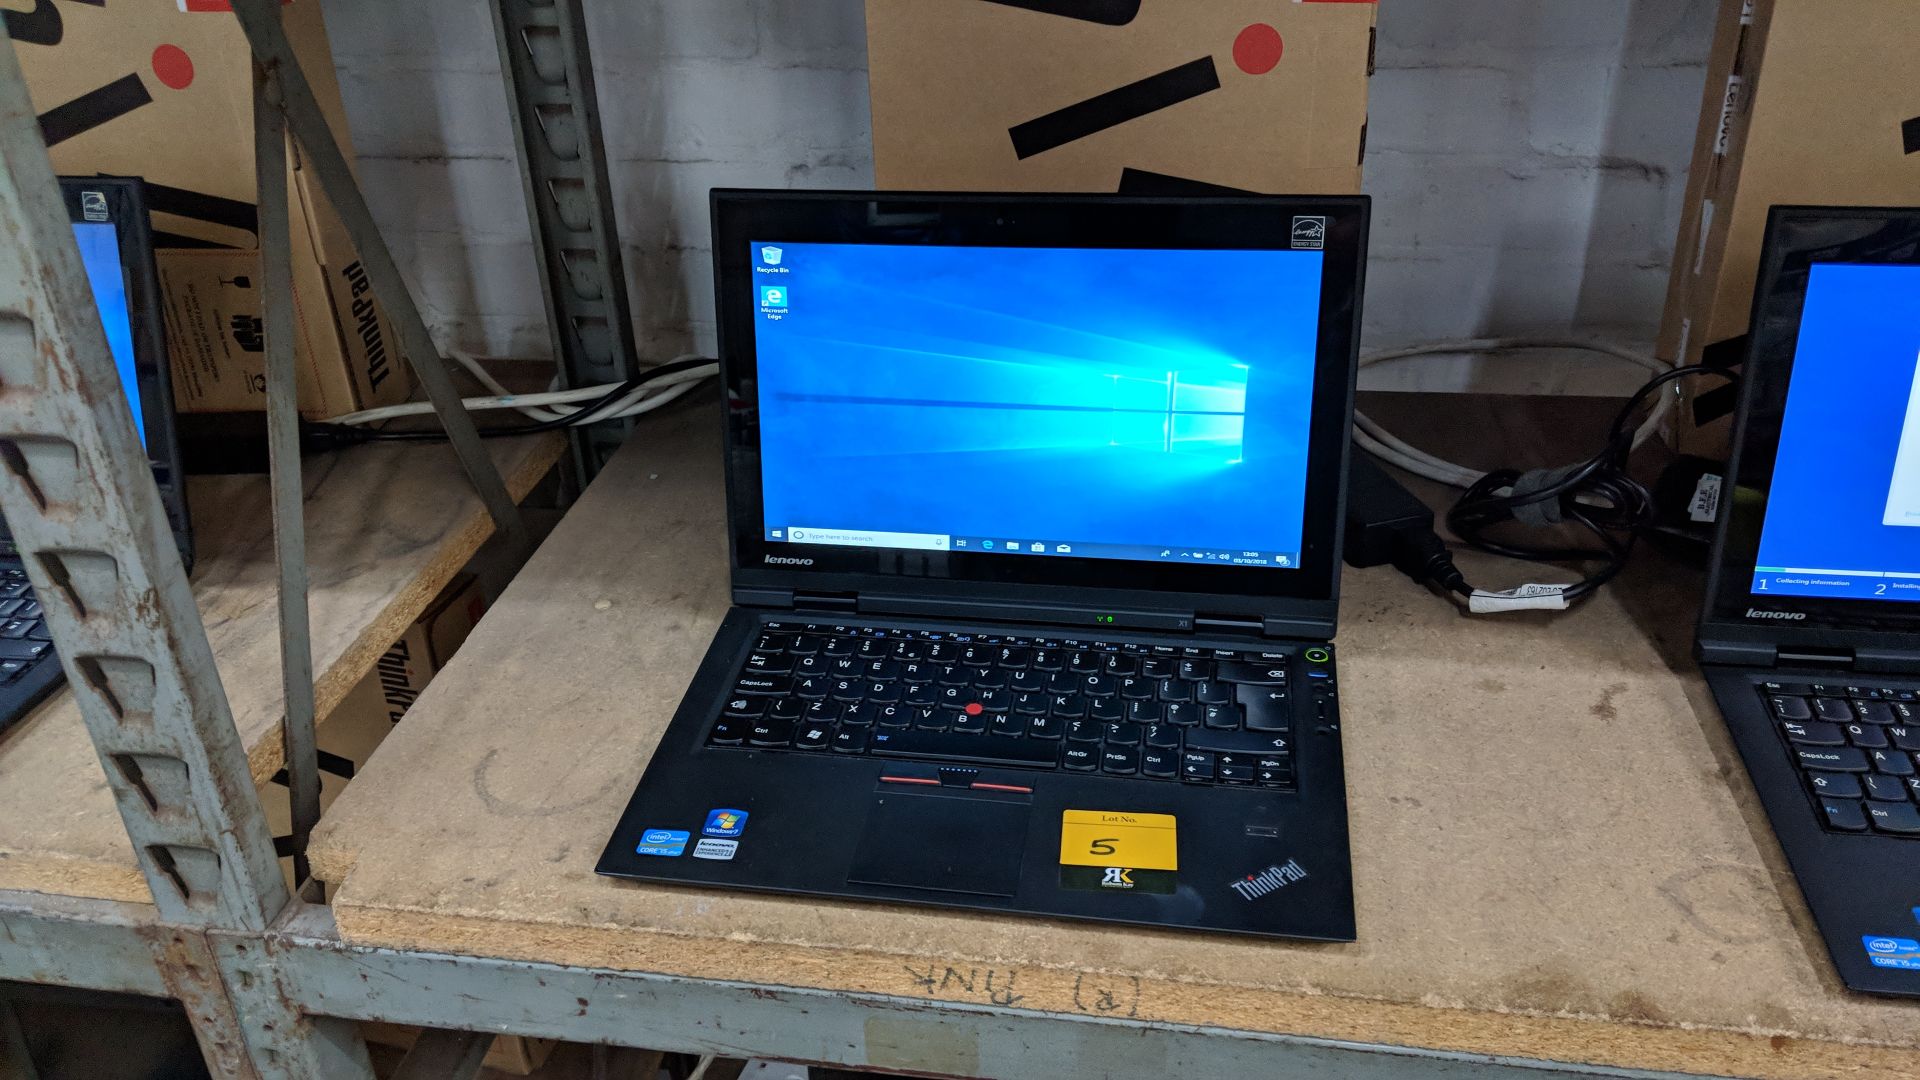 Lenovo ThinkPad X1 notebook computer, model 1294AY1 with built-in webcam. Intel Core i5-2520M CPU@ - Image 2 of 6